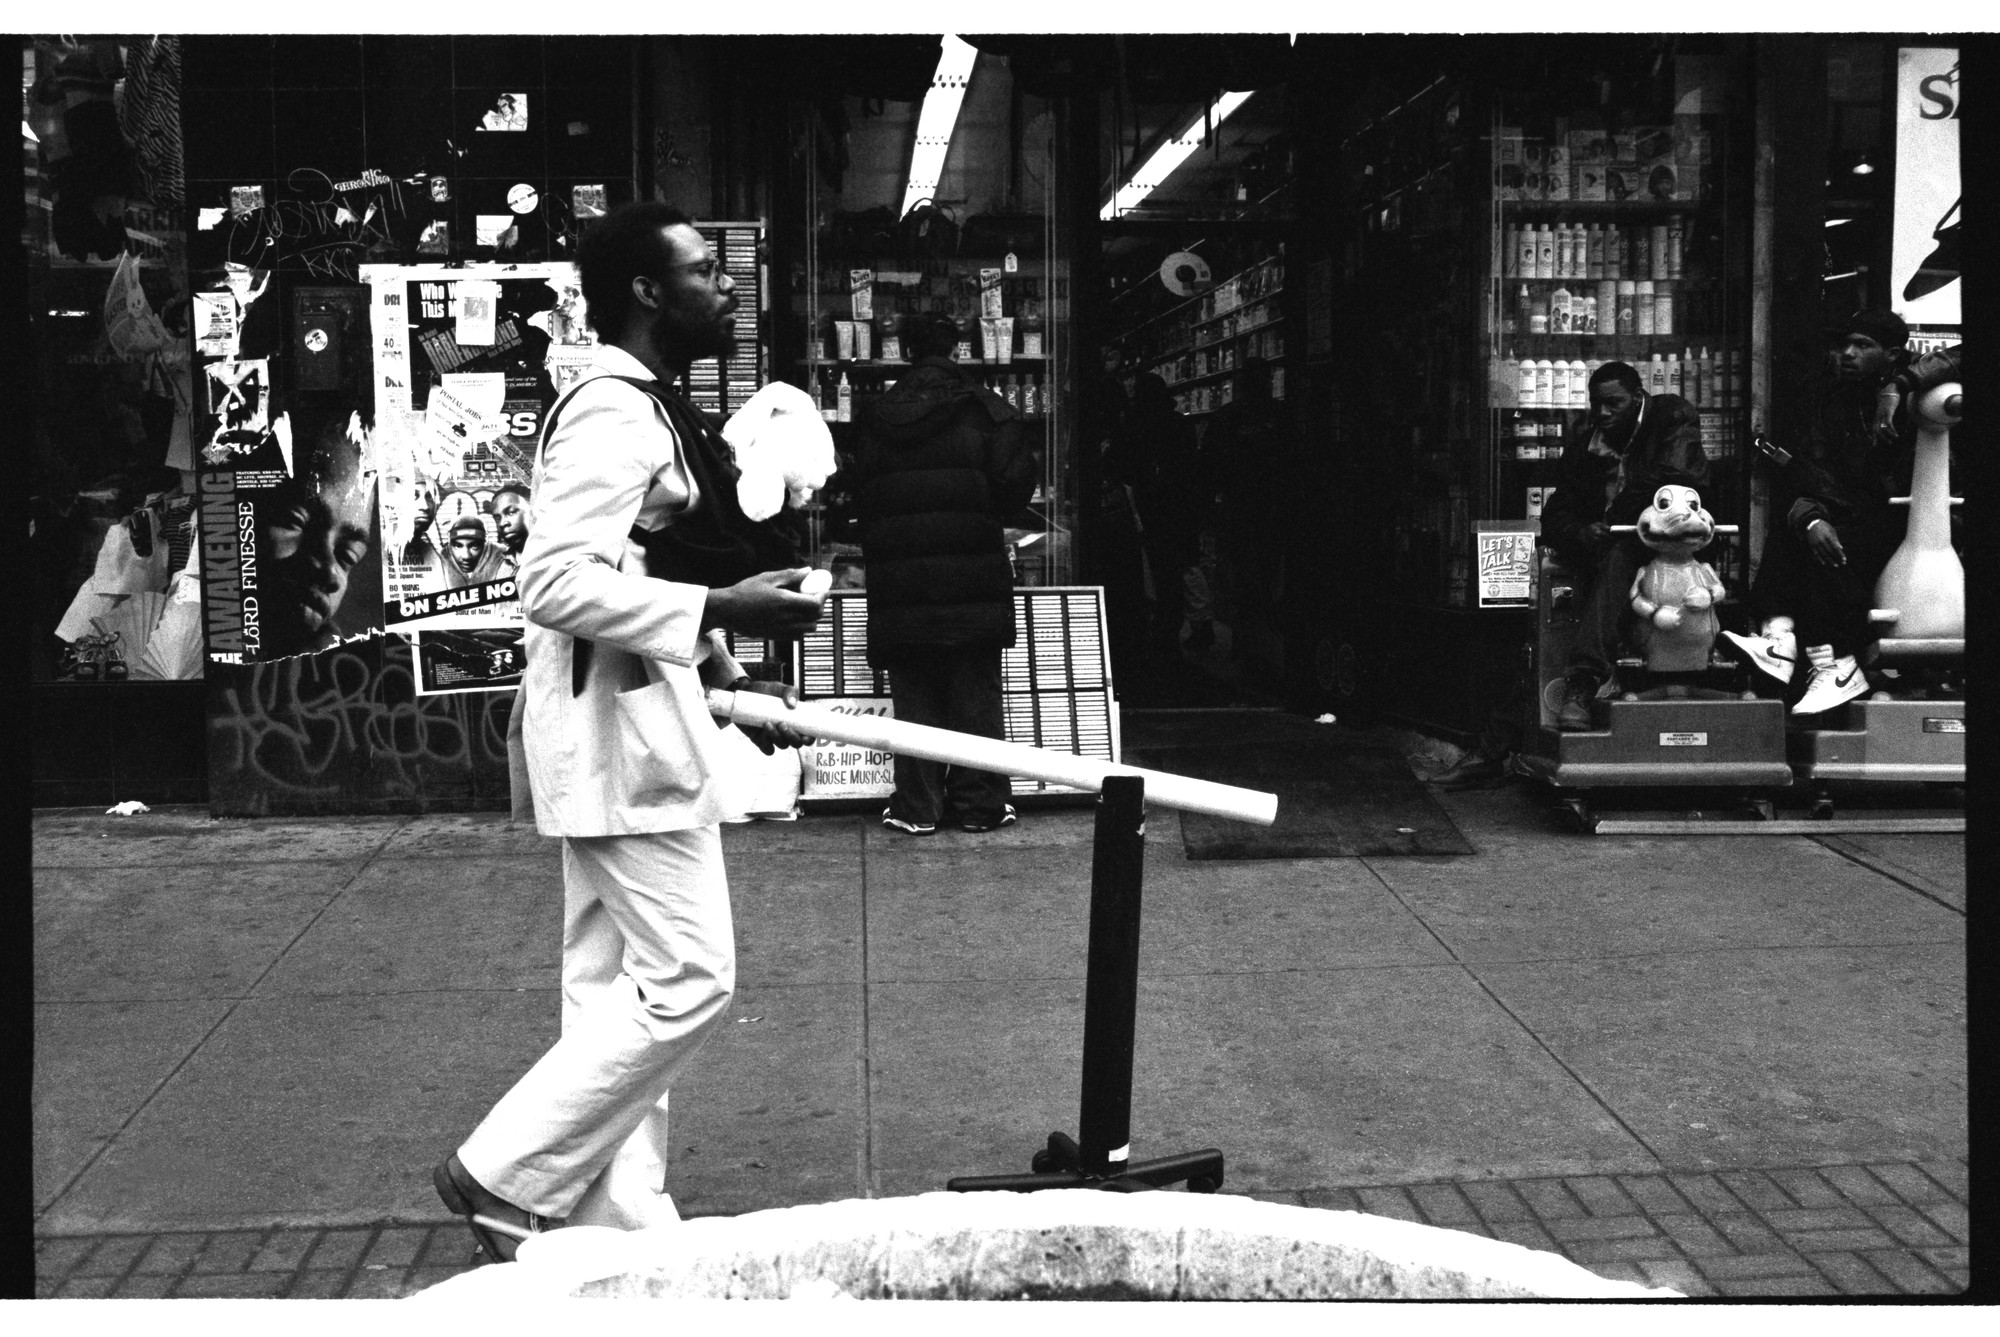 Pope.L (American, born 1955). _Member a.k.a. Schlong Journey, 125th Street, New York_. 1996. Inkjet print, 10 × 15" (25.4 × 38.1 cm). The Museum of Modern Art, New York. Acquired in part through the generosity of Jill and Peter Kraus, Anne and Joel S. Ehrenkranz, The Contemporary Arts Council of The Museum of Modern Art, The Jill and Peter Kraus Media and Performance Acquisition Fund, and Jill and Peter Kraus in honor of Michael Lynne. © Pope.L, courtesy the artist

